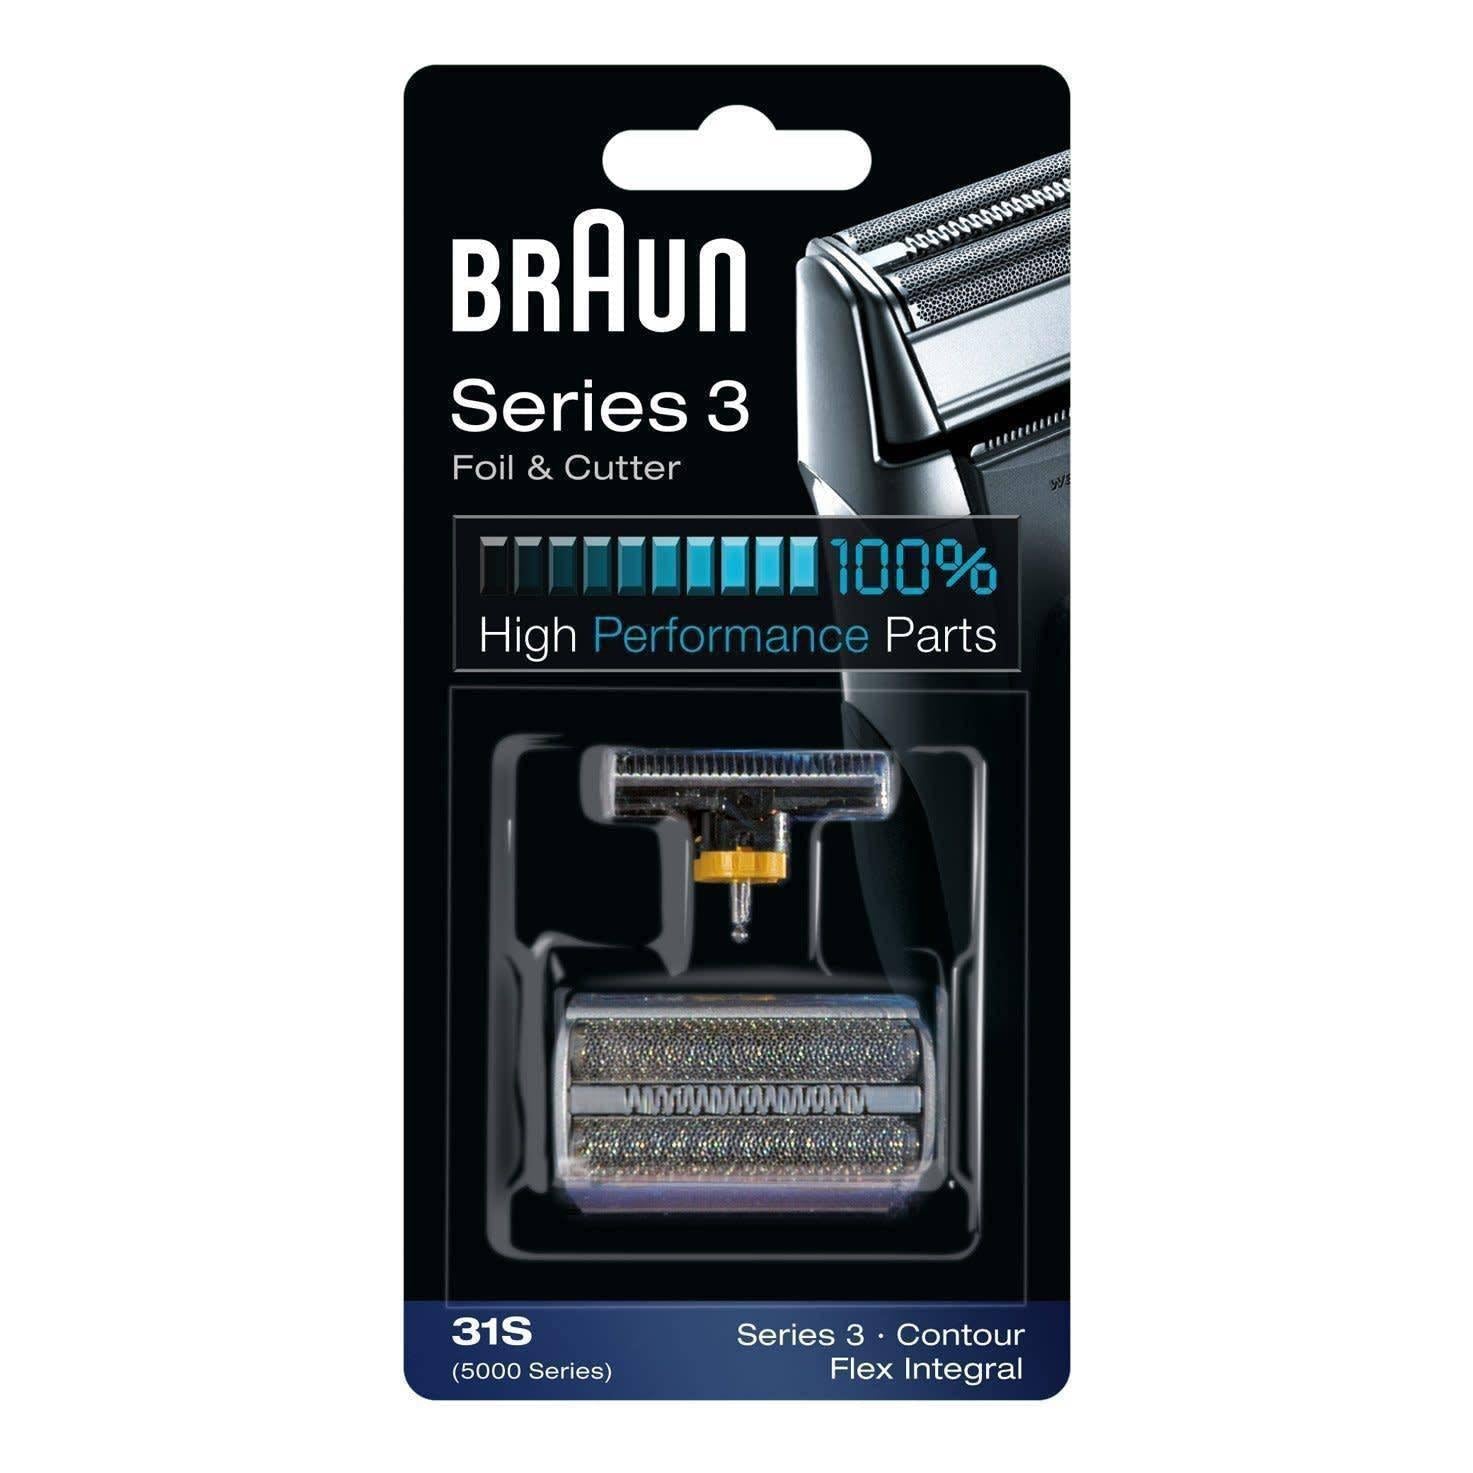 Braun Replacement Foil and Cutter - 31S, Fits Series 3, Contour, Flex XP- 5000 Series Only - Silver - Healthxpress.ie